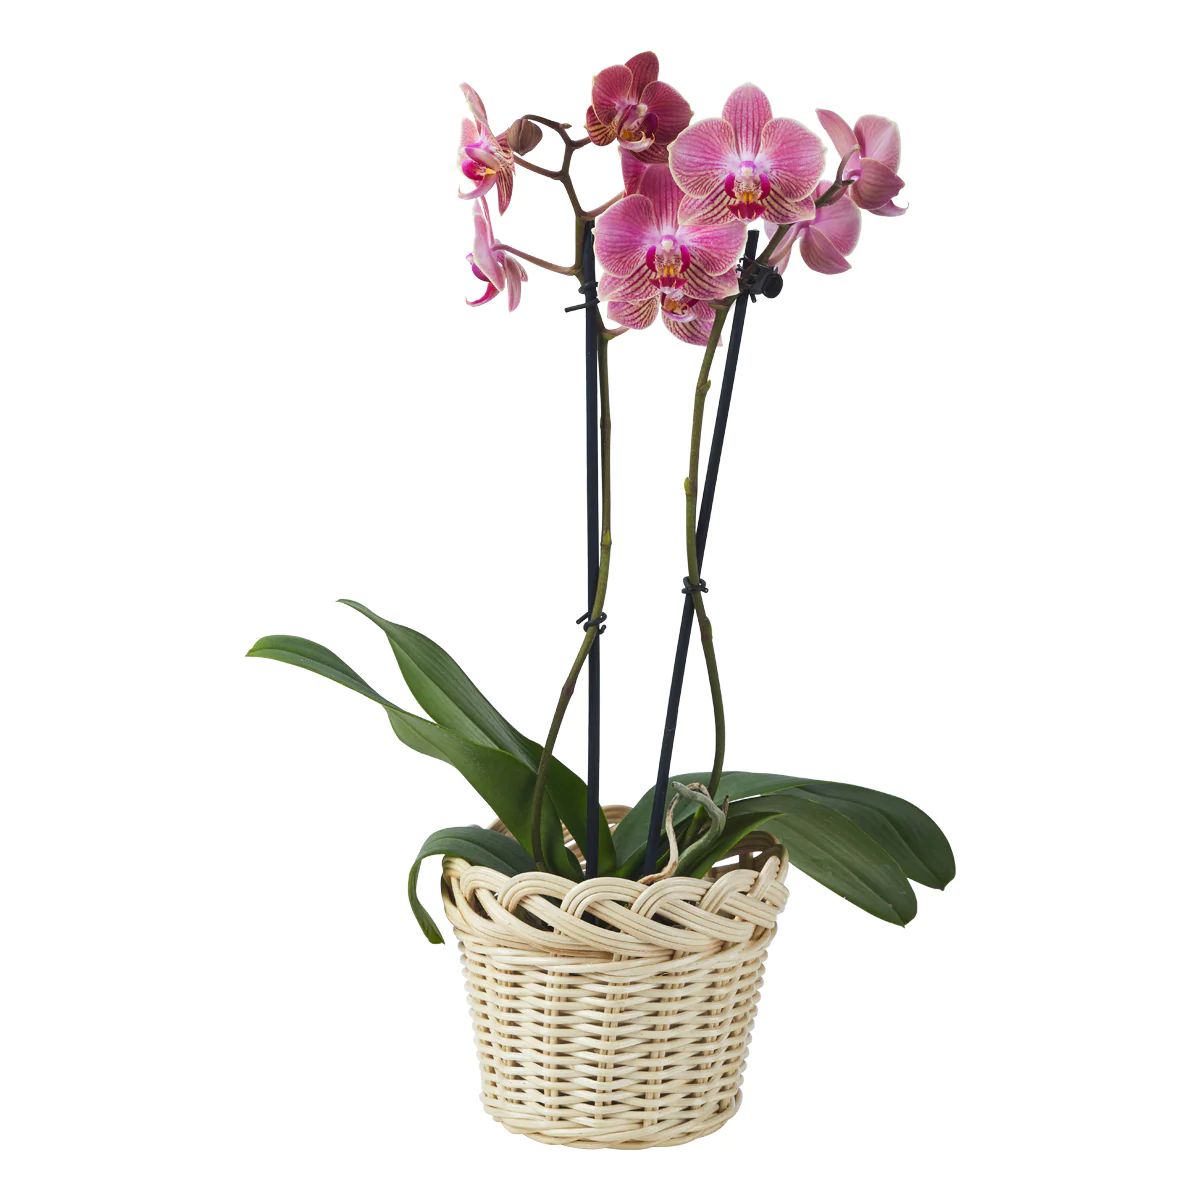 Braided Orchid Baskets Small, Set of 3 | Amanda Lindroth